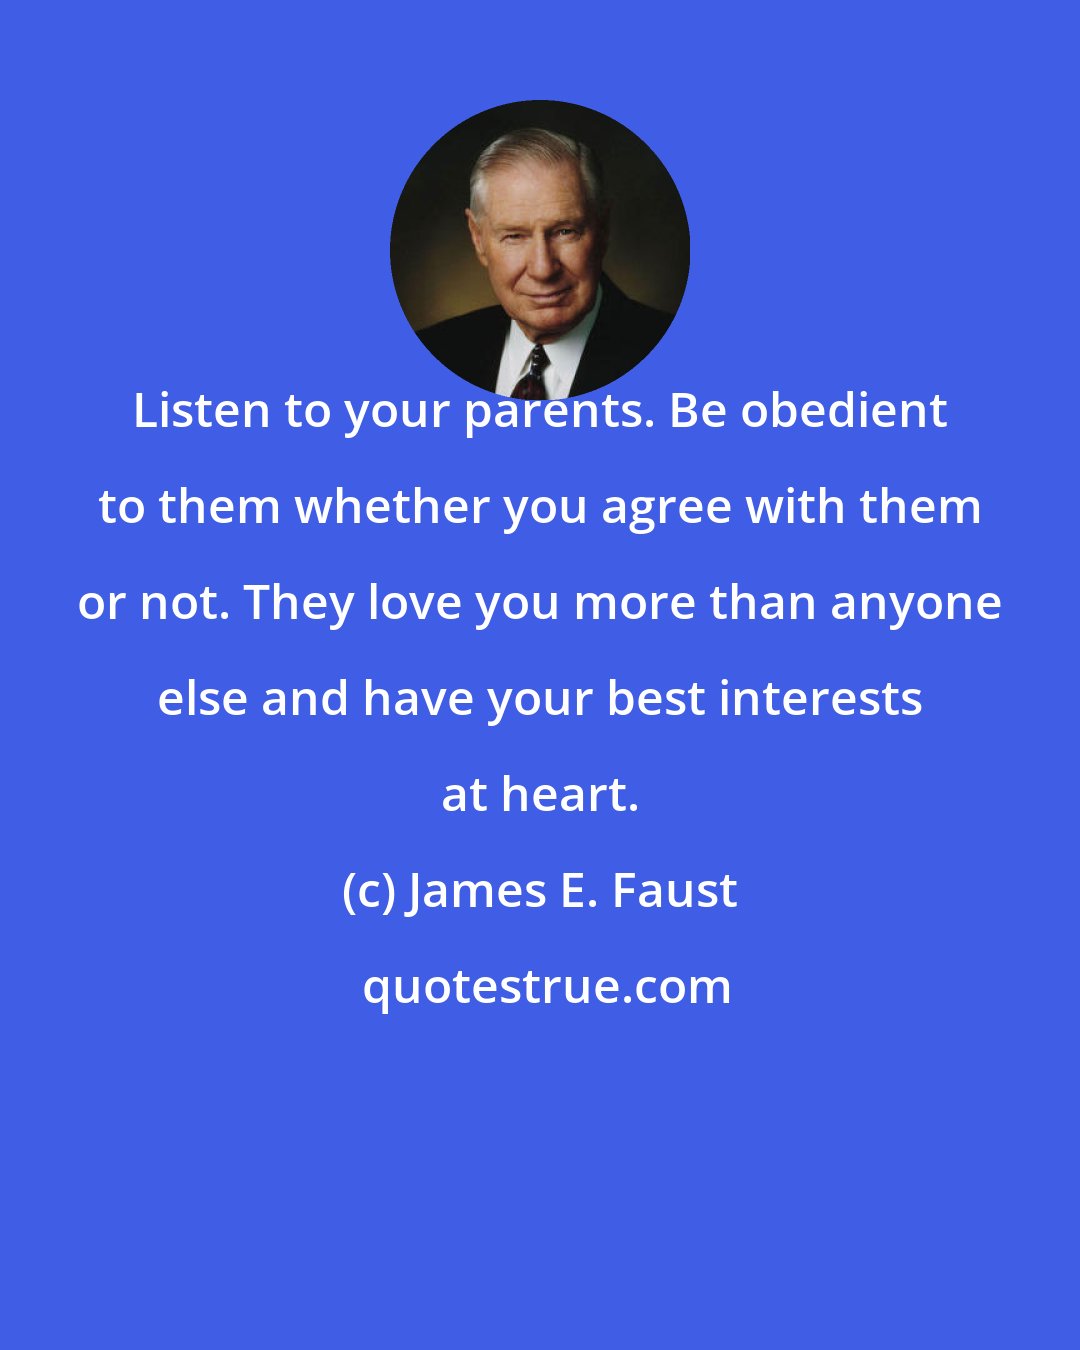 James E. Faust: Listen to your parents. Be obedient to them whether you agree with them or not. They love you more than anyone else and have your best interests at heart.